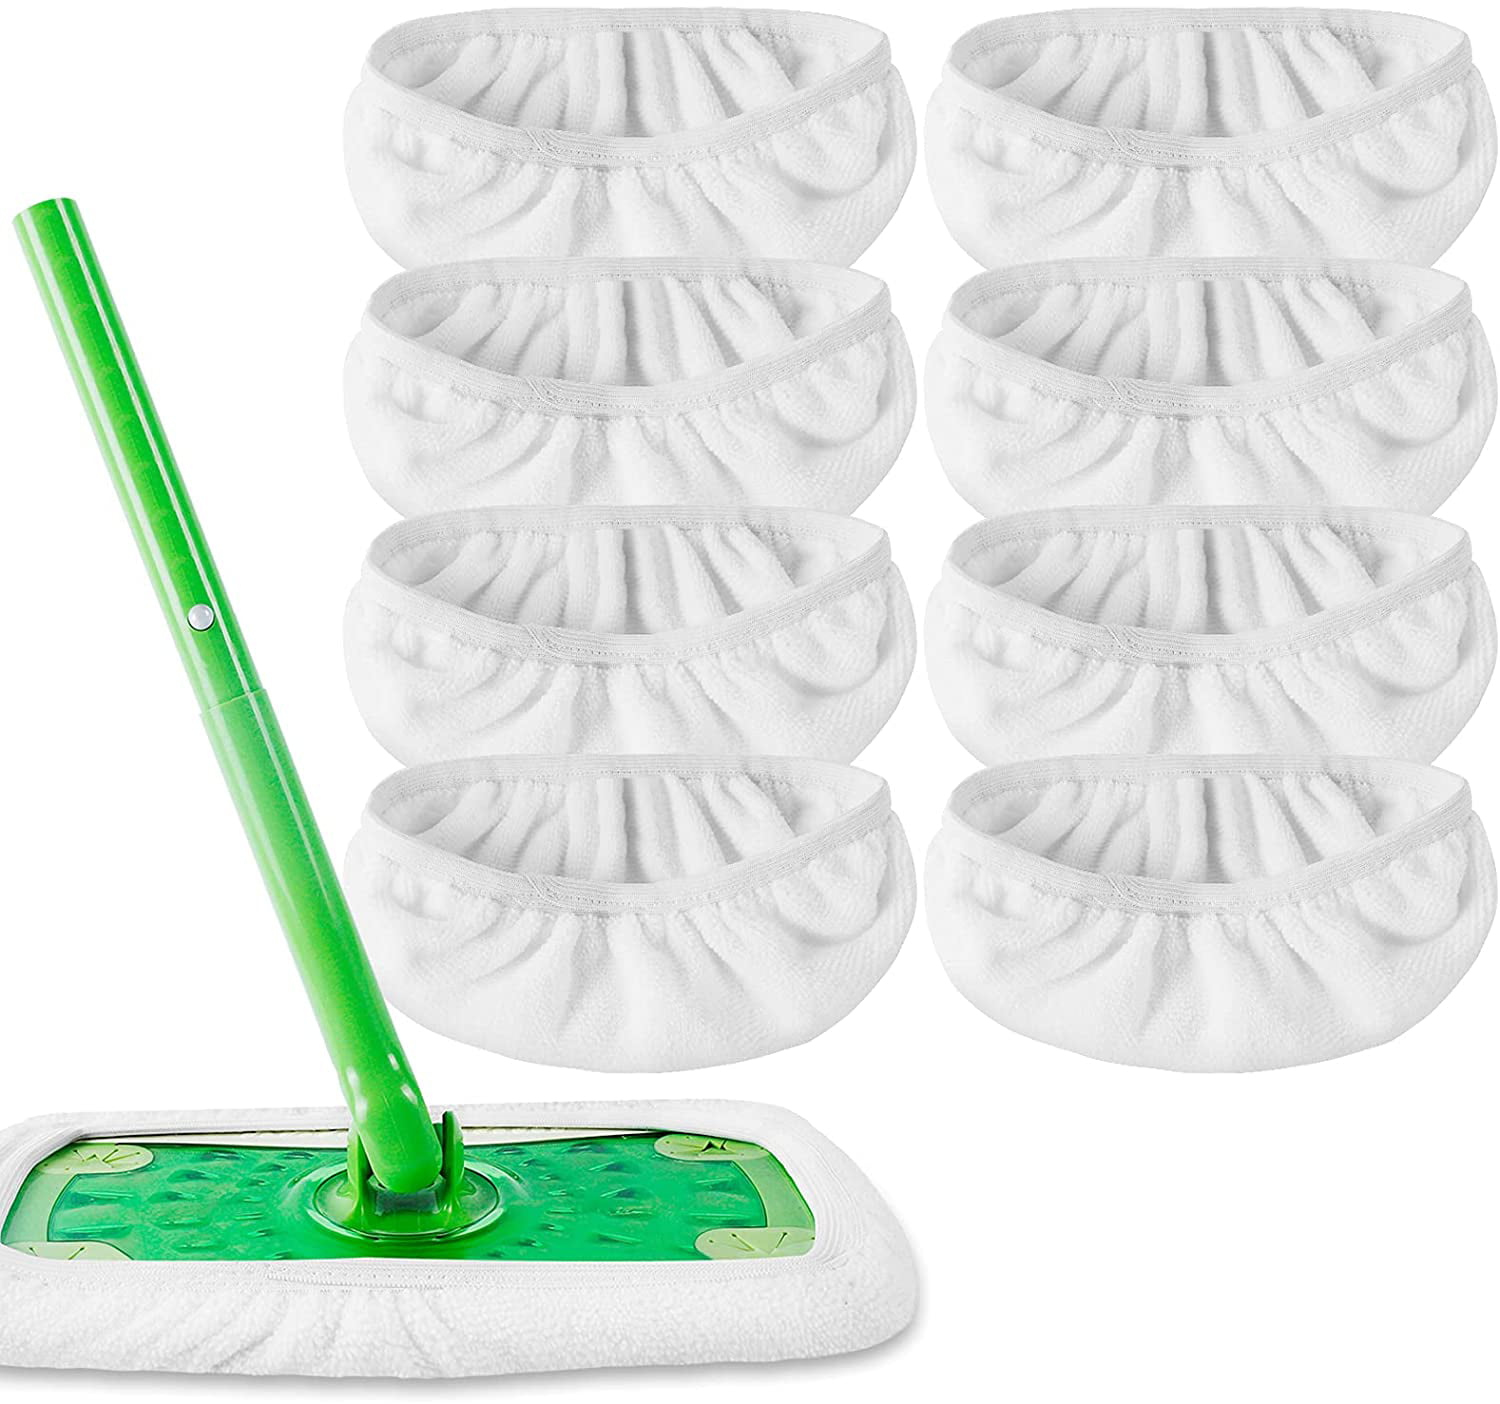 3 Reusable Replacement Microfiber Pads for Swiffer Bissell Steamboost 